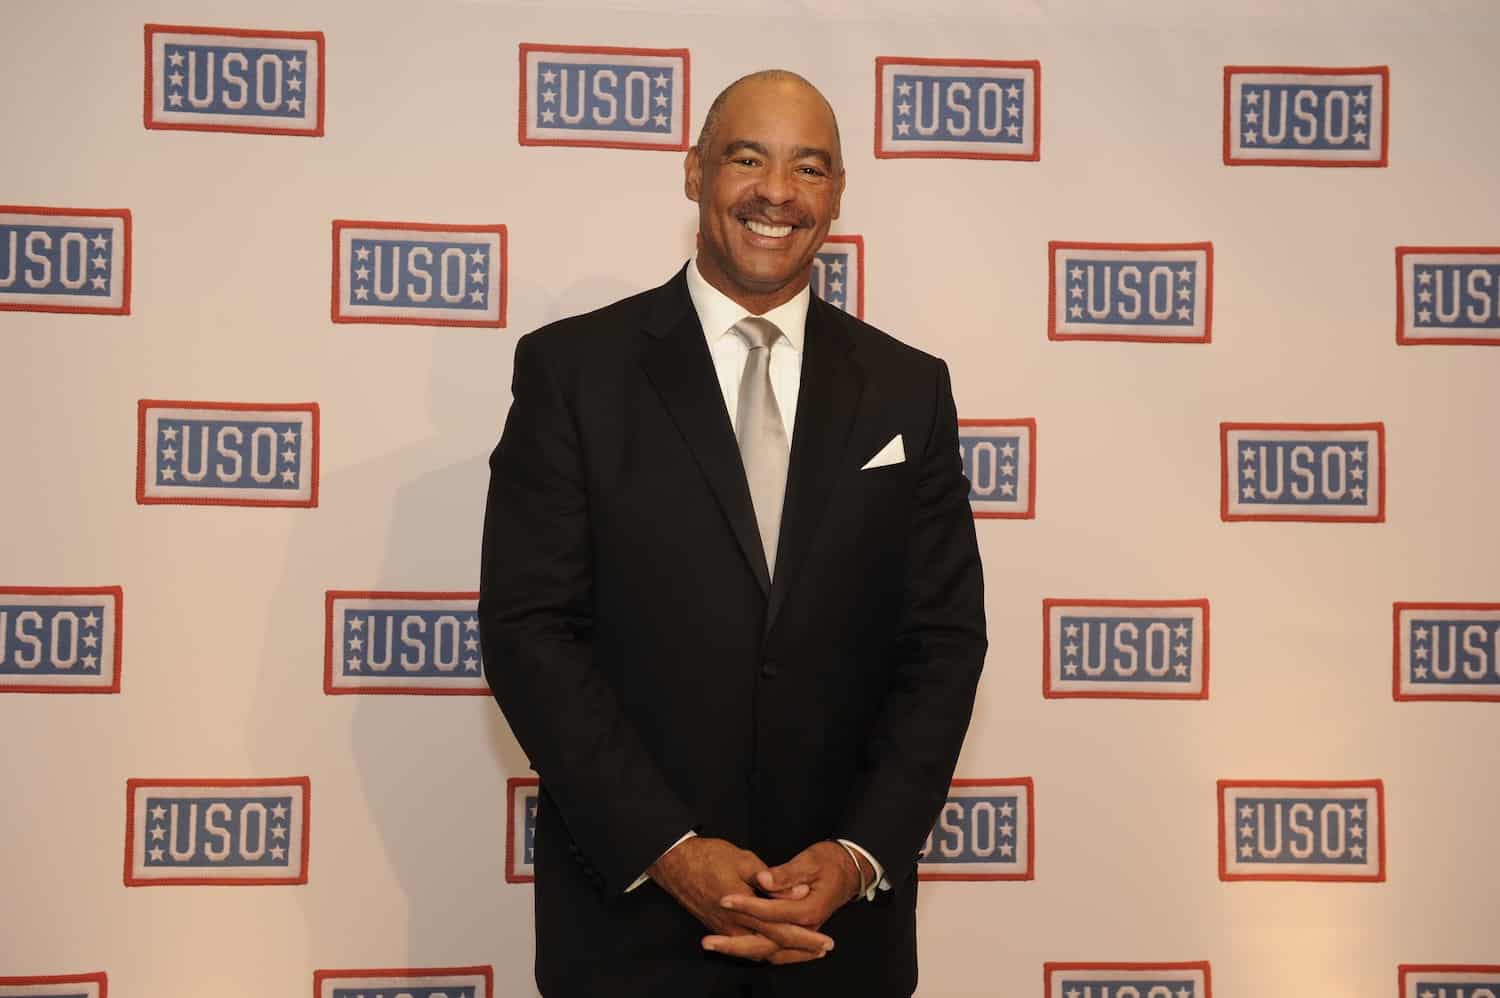 Pro Football Hall Of Fame Tight End Kellen Winslow. Photo Credit: The USO | Under Creative Commons License